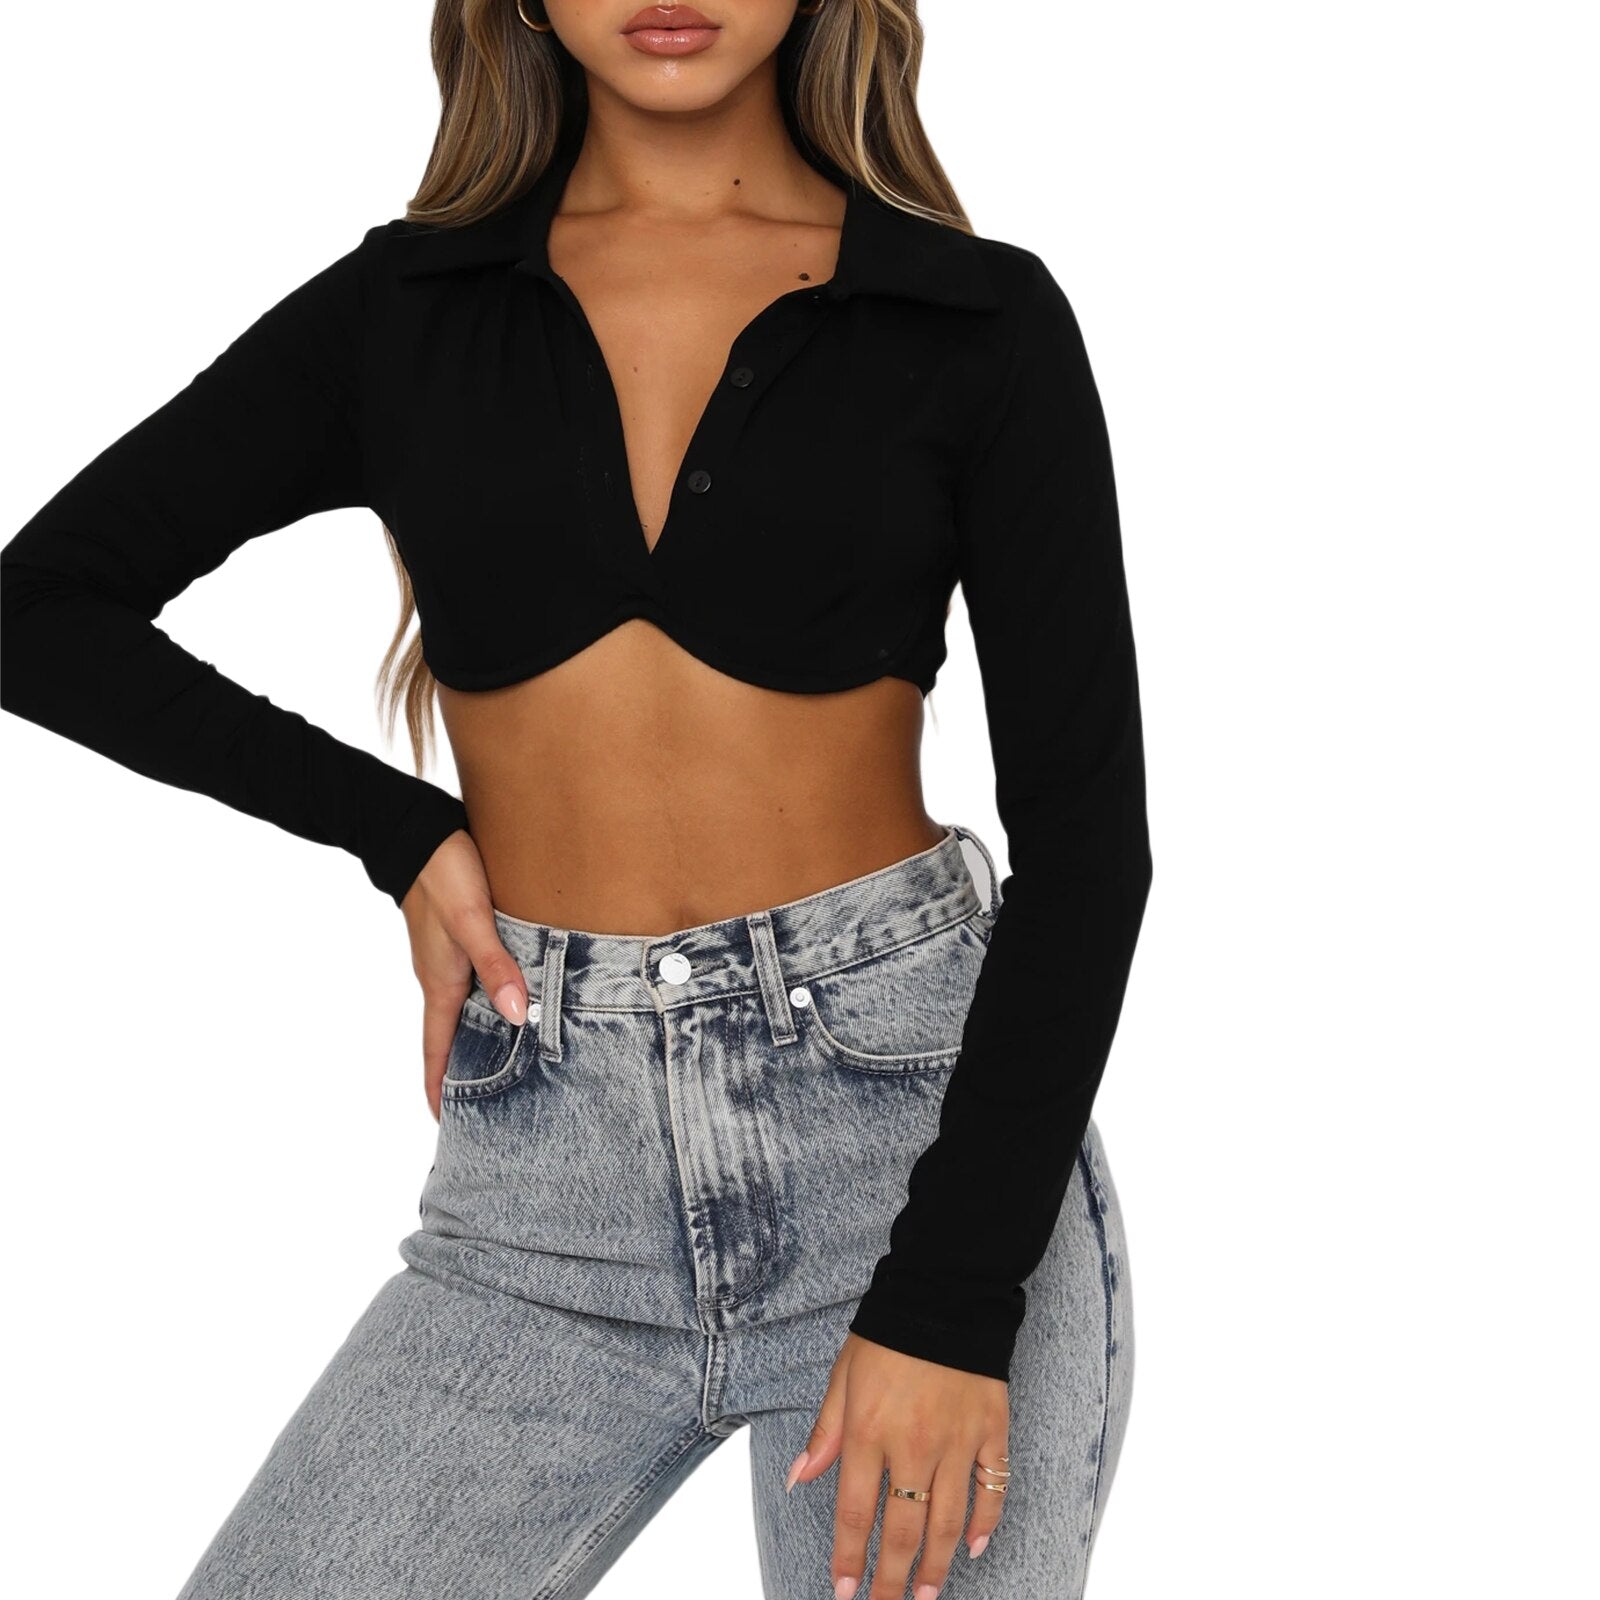 Poshoot  Chic Solid Color Lapel Button down Wrap Tube Tops Autumn Streetwear Women's Long Sleeve Slim Fit T-Shirt Crop Tops